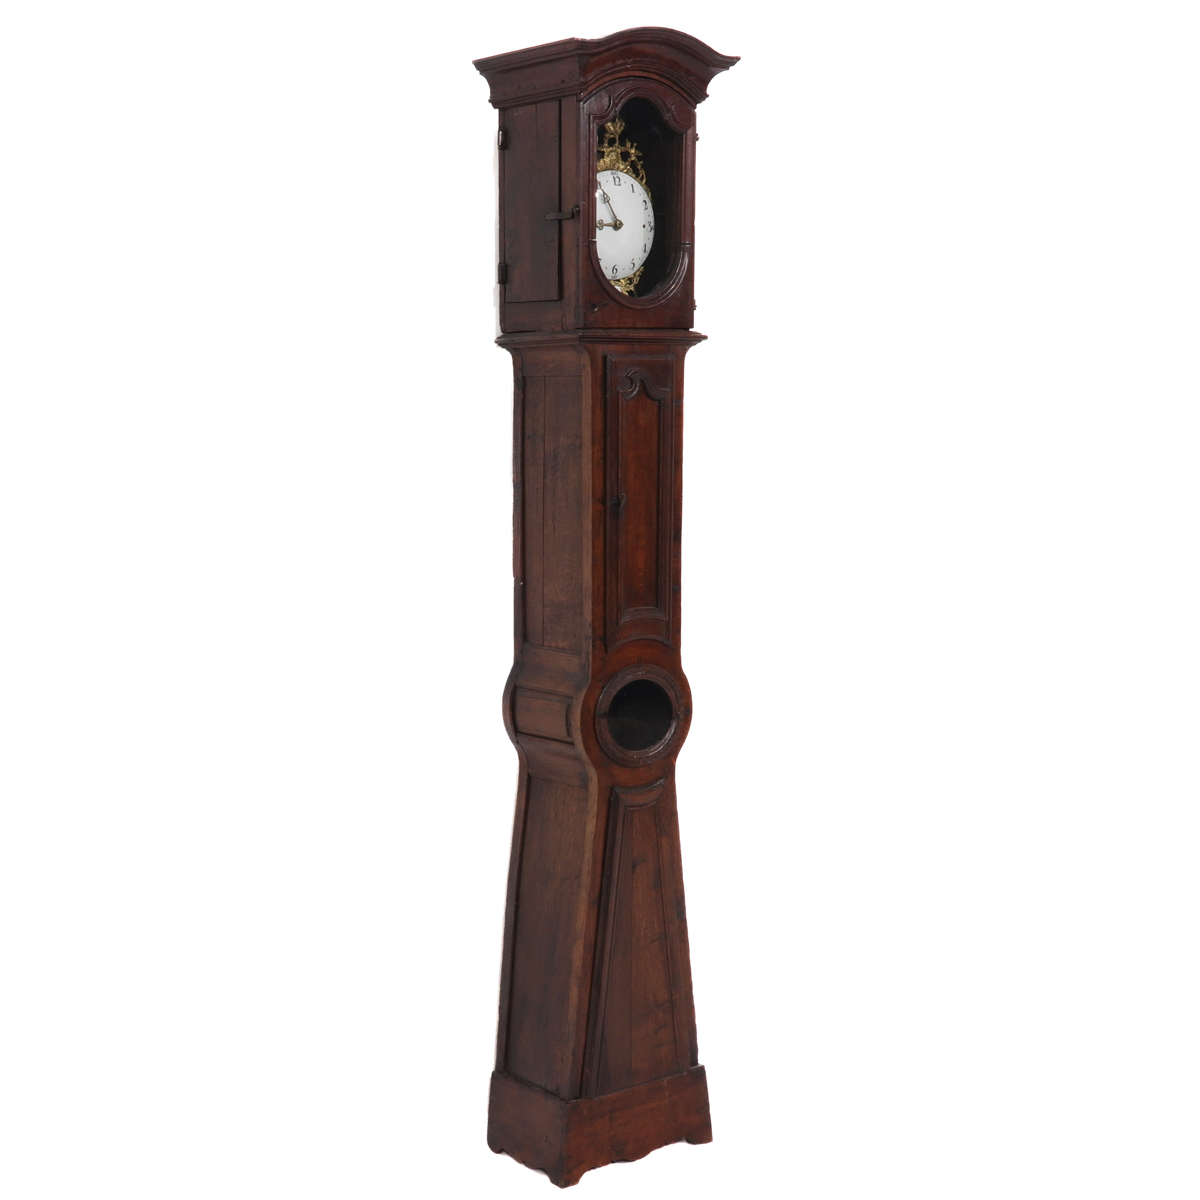 A Long Case Clock - Image 2 of 10